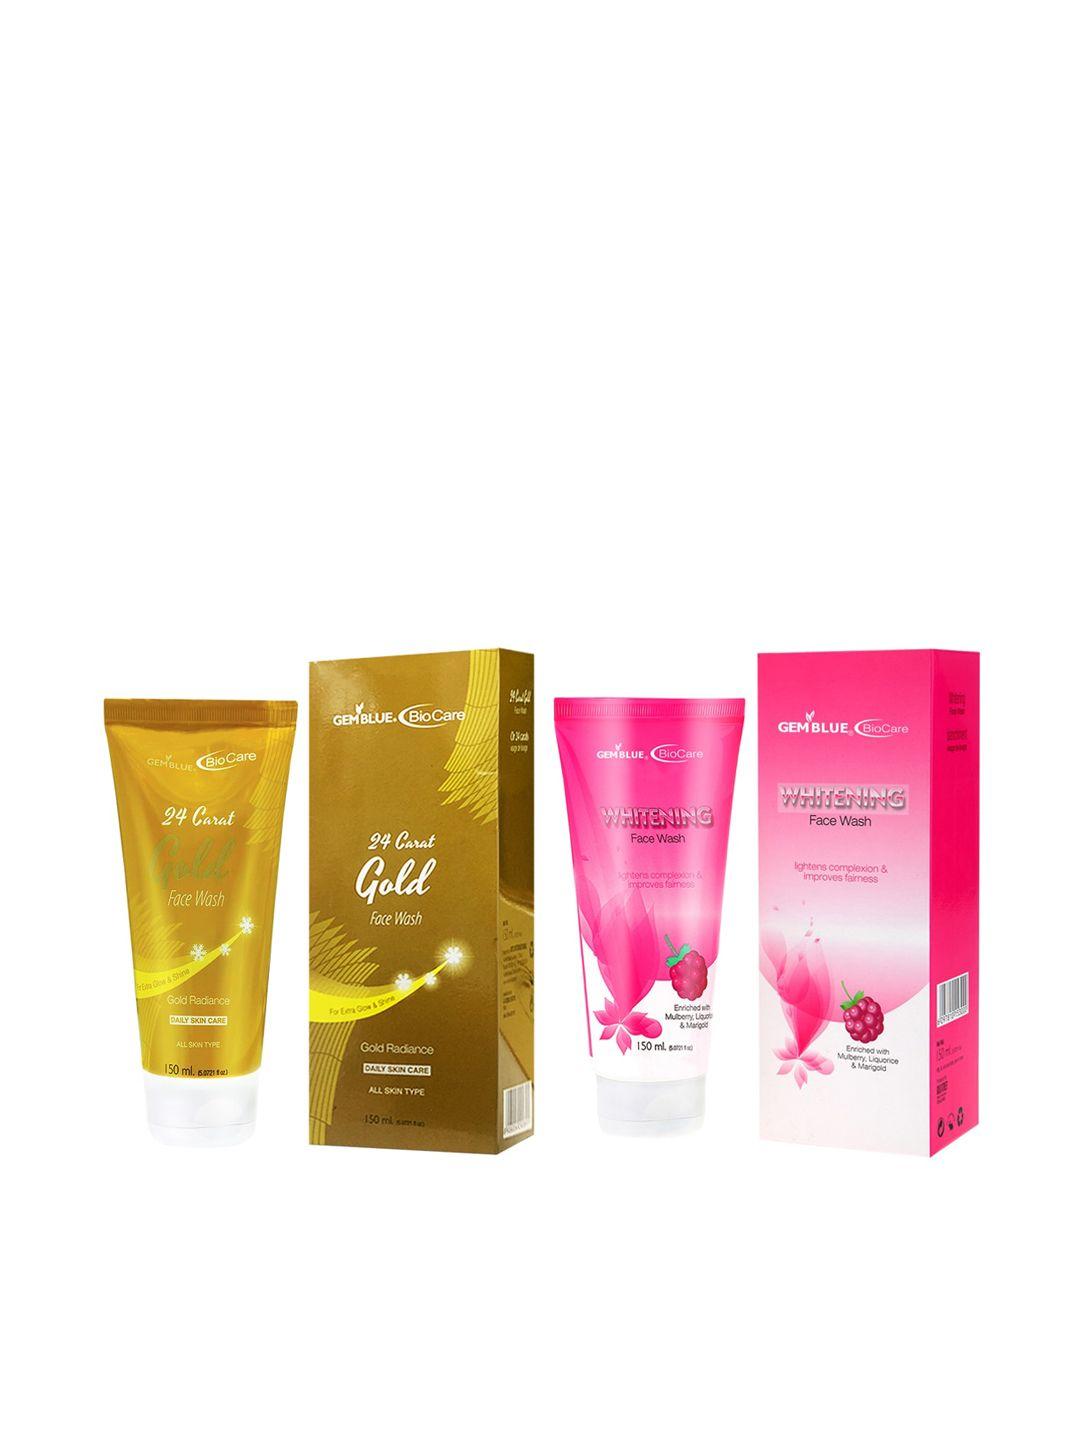 gemblue biocare 24 carat-gold face wash and whitening face wash 150ml (combo of 2)